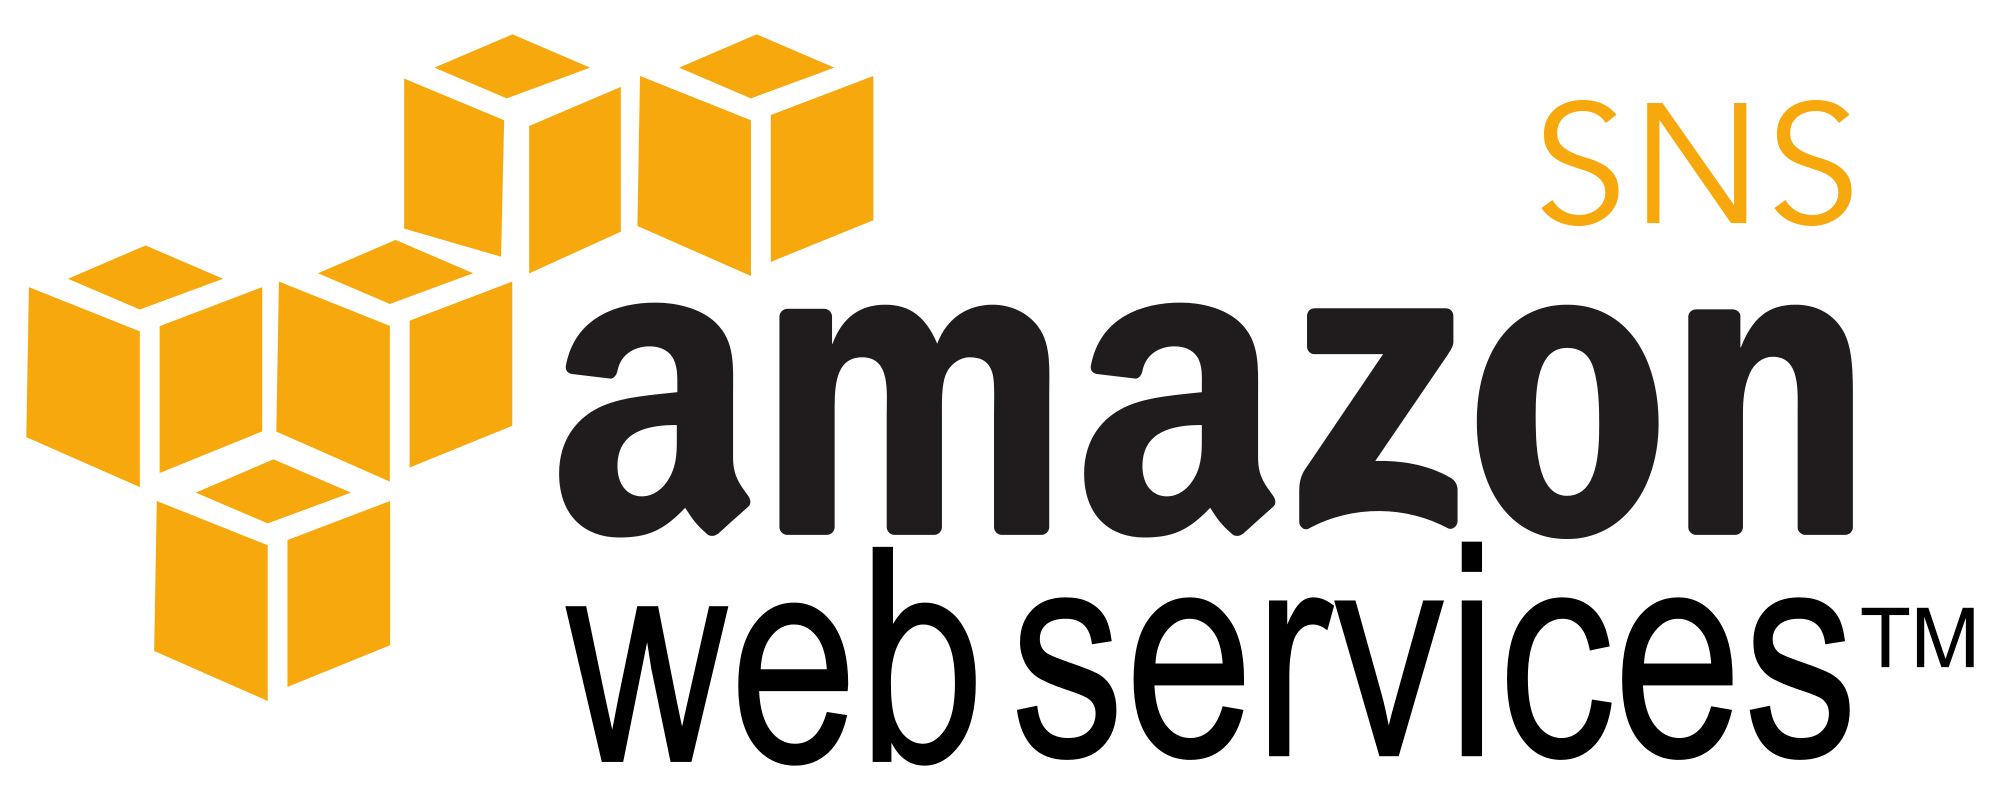 Notifications can be sent for AWS directory Service using Amazon SNS